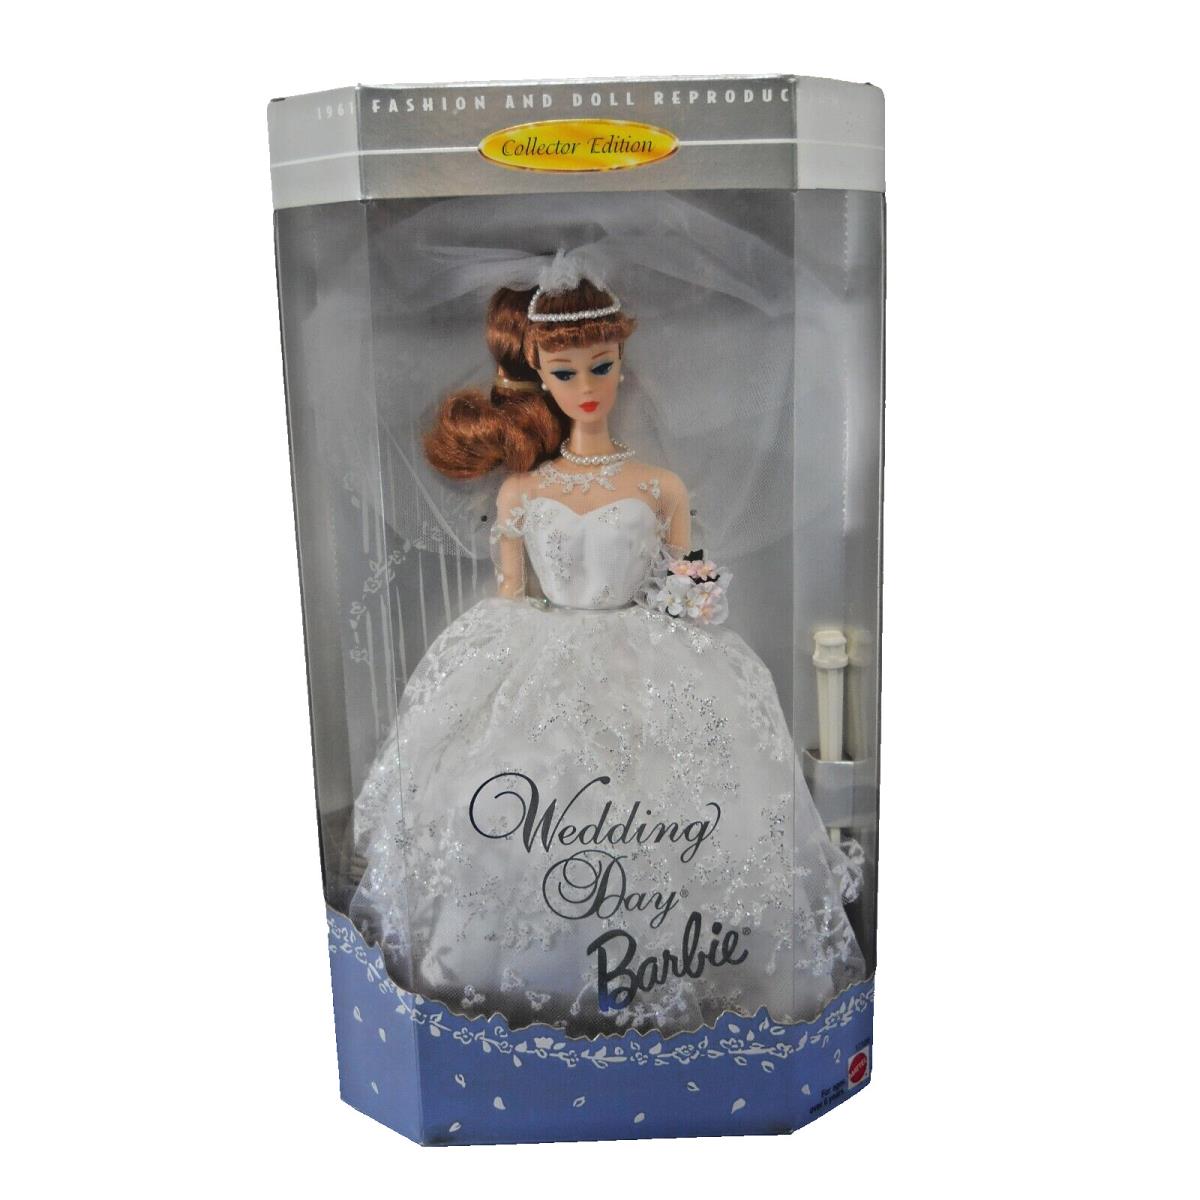 1996 Reproduction 1961 Wedding Day Barbie Redhead Collector Edition 17120 Nrfb